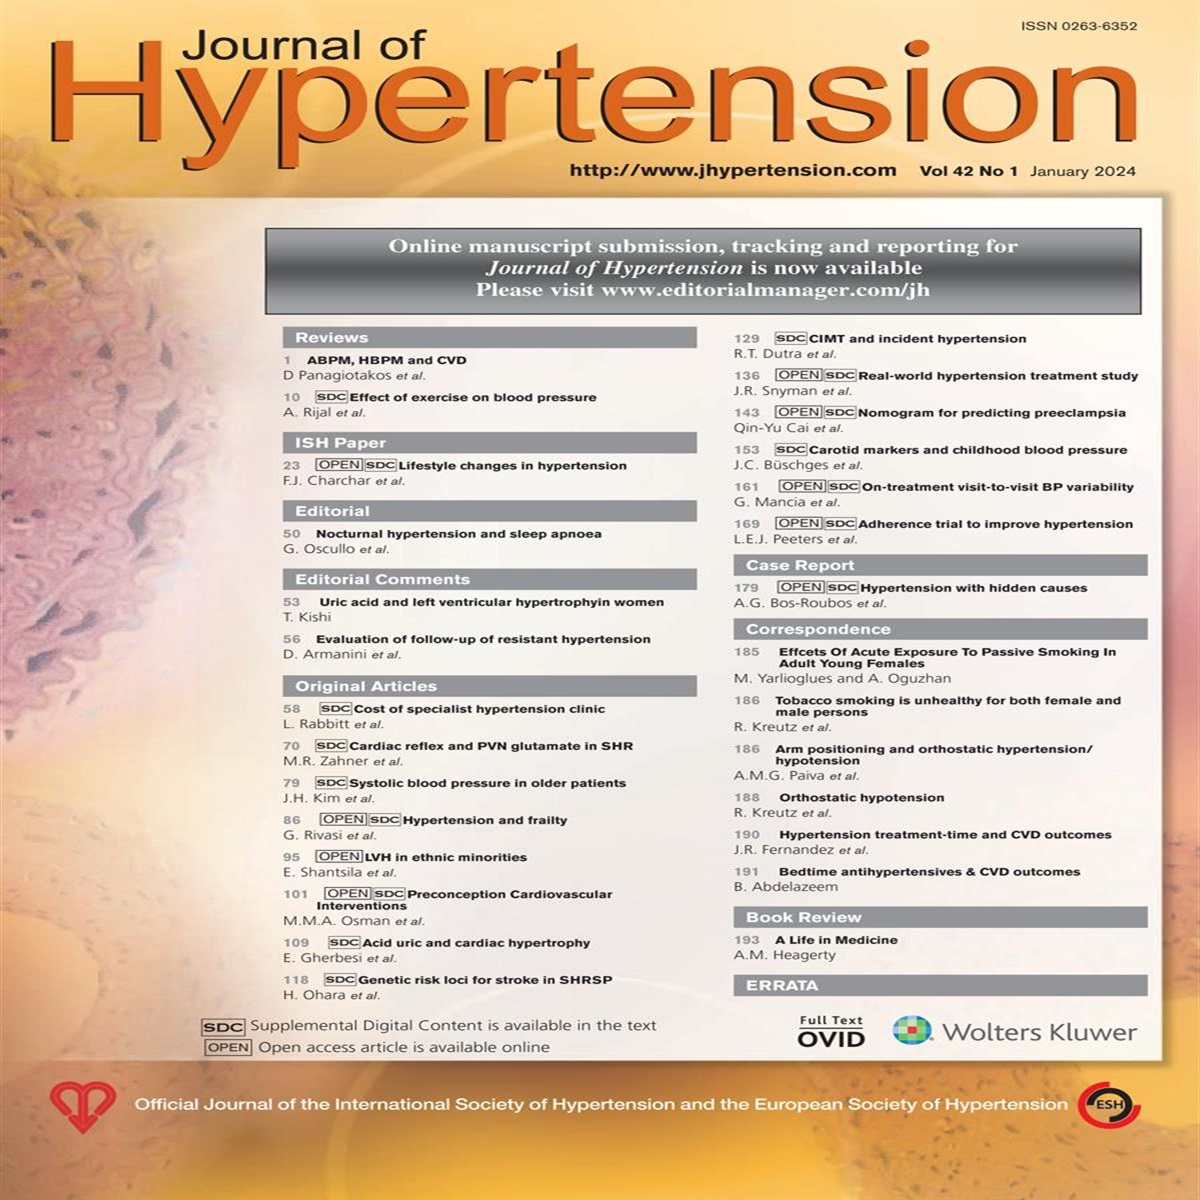 Orthostatic hypotension an important phenotype in the 2023 European Society of Hypertension guidelines: how to measure it?